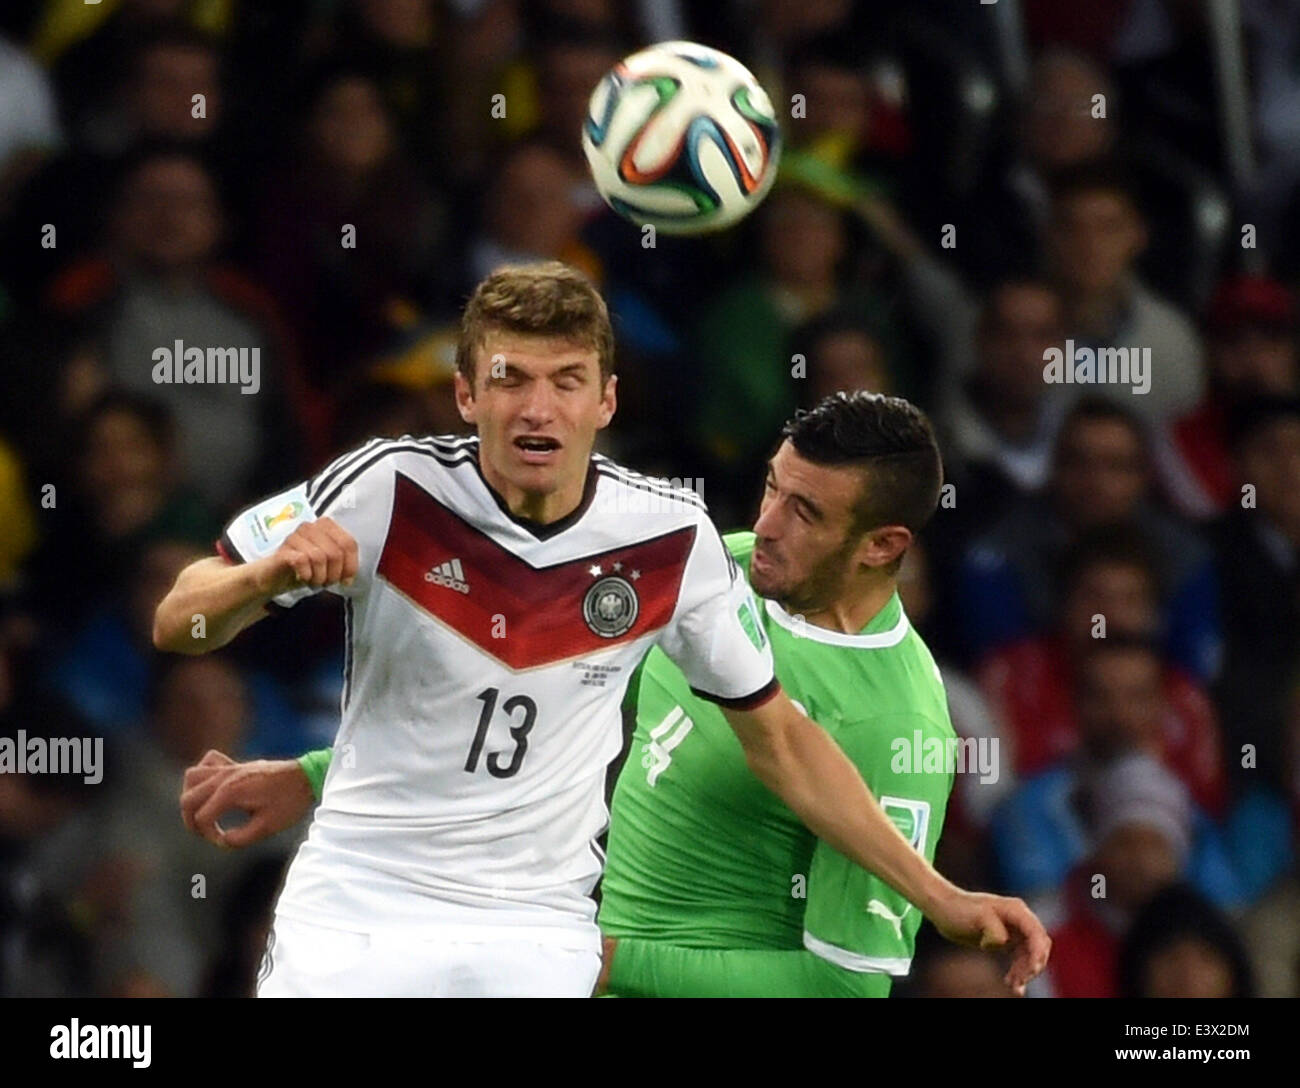 Porto Alegre, Brazil. 30th June, 2014. Germany's Thomas Muller (L) vies with Algeria's Essaid Belkalem during a Round of 16 match between Germany and Algeria of 2014 FIFA World Cup at the Estadio Beira-Rio Stadium in Porto Alegre, Brazil, on June 30, 2014. Credit:  Li Ga/Xinhua/Alamy Live News Stock Photo